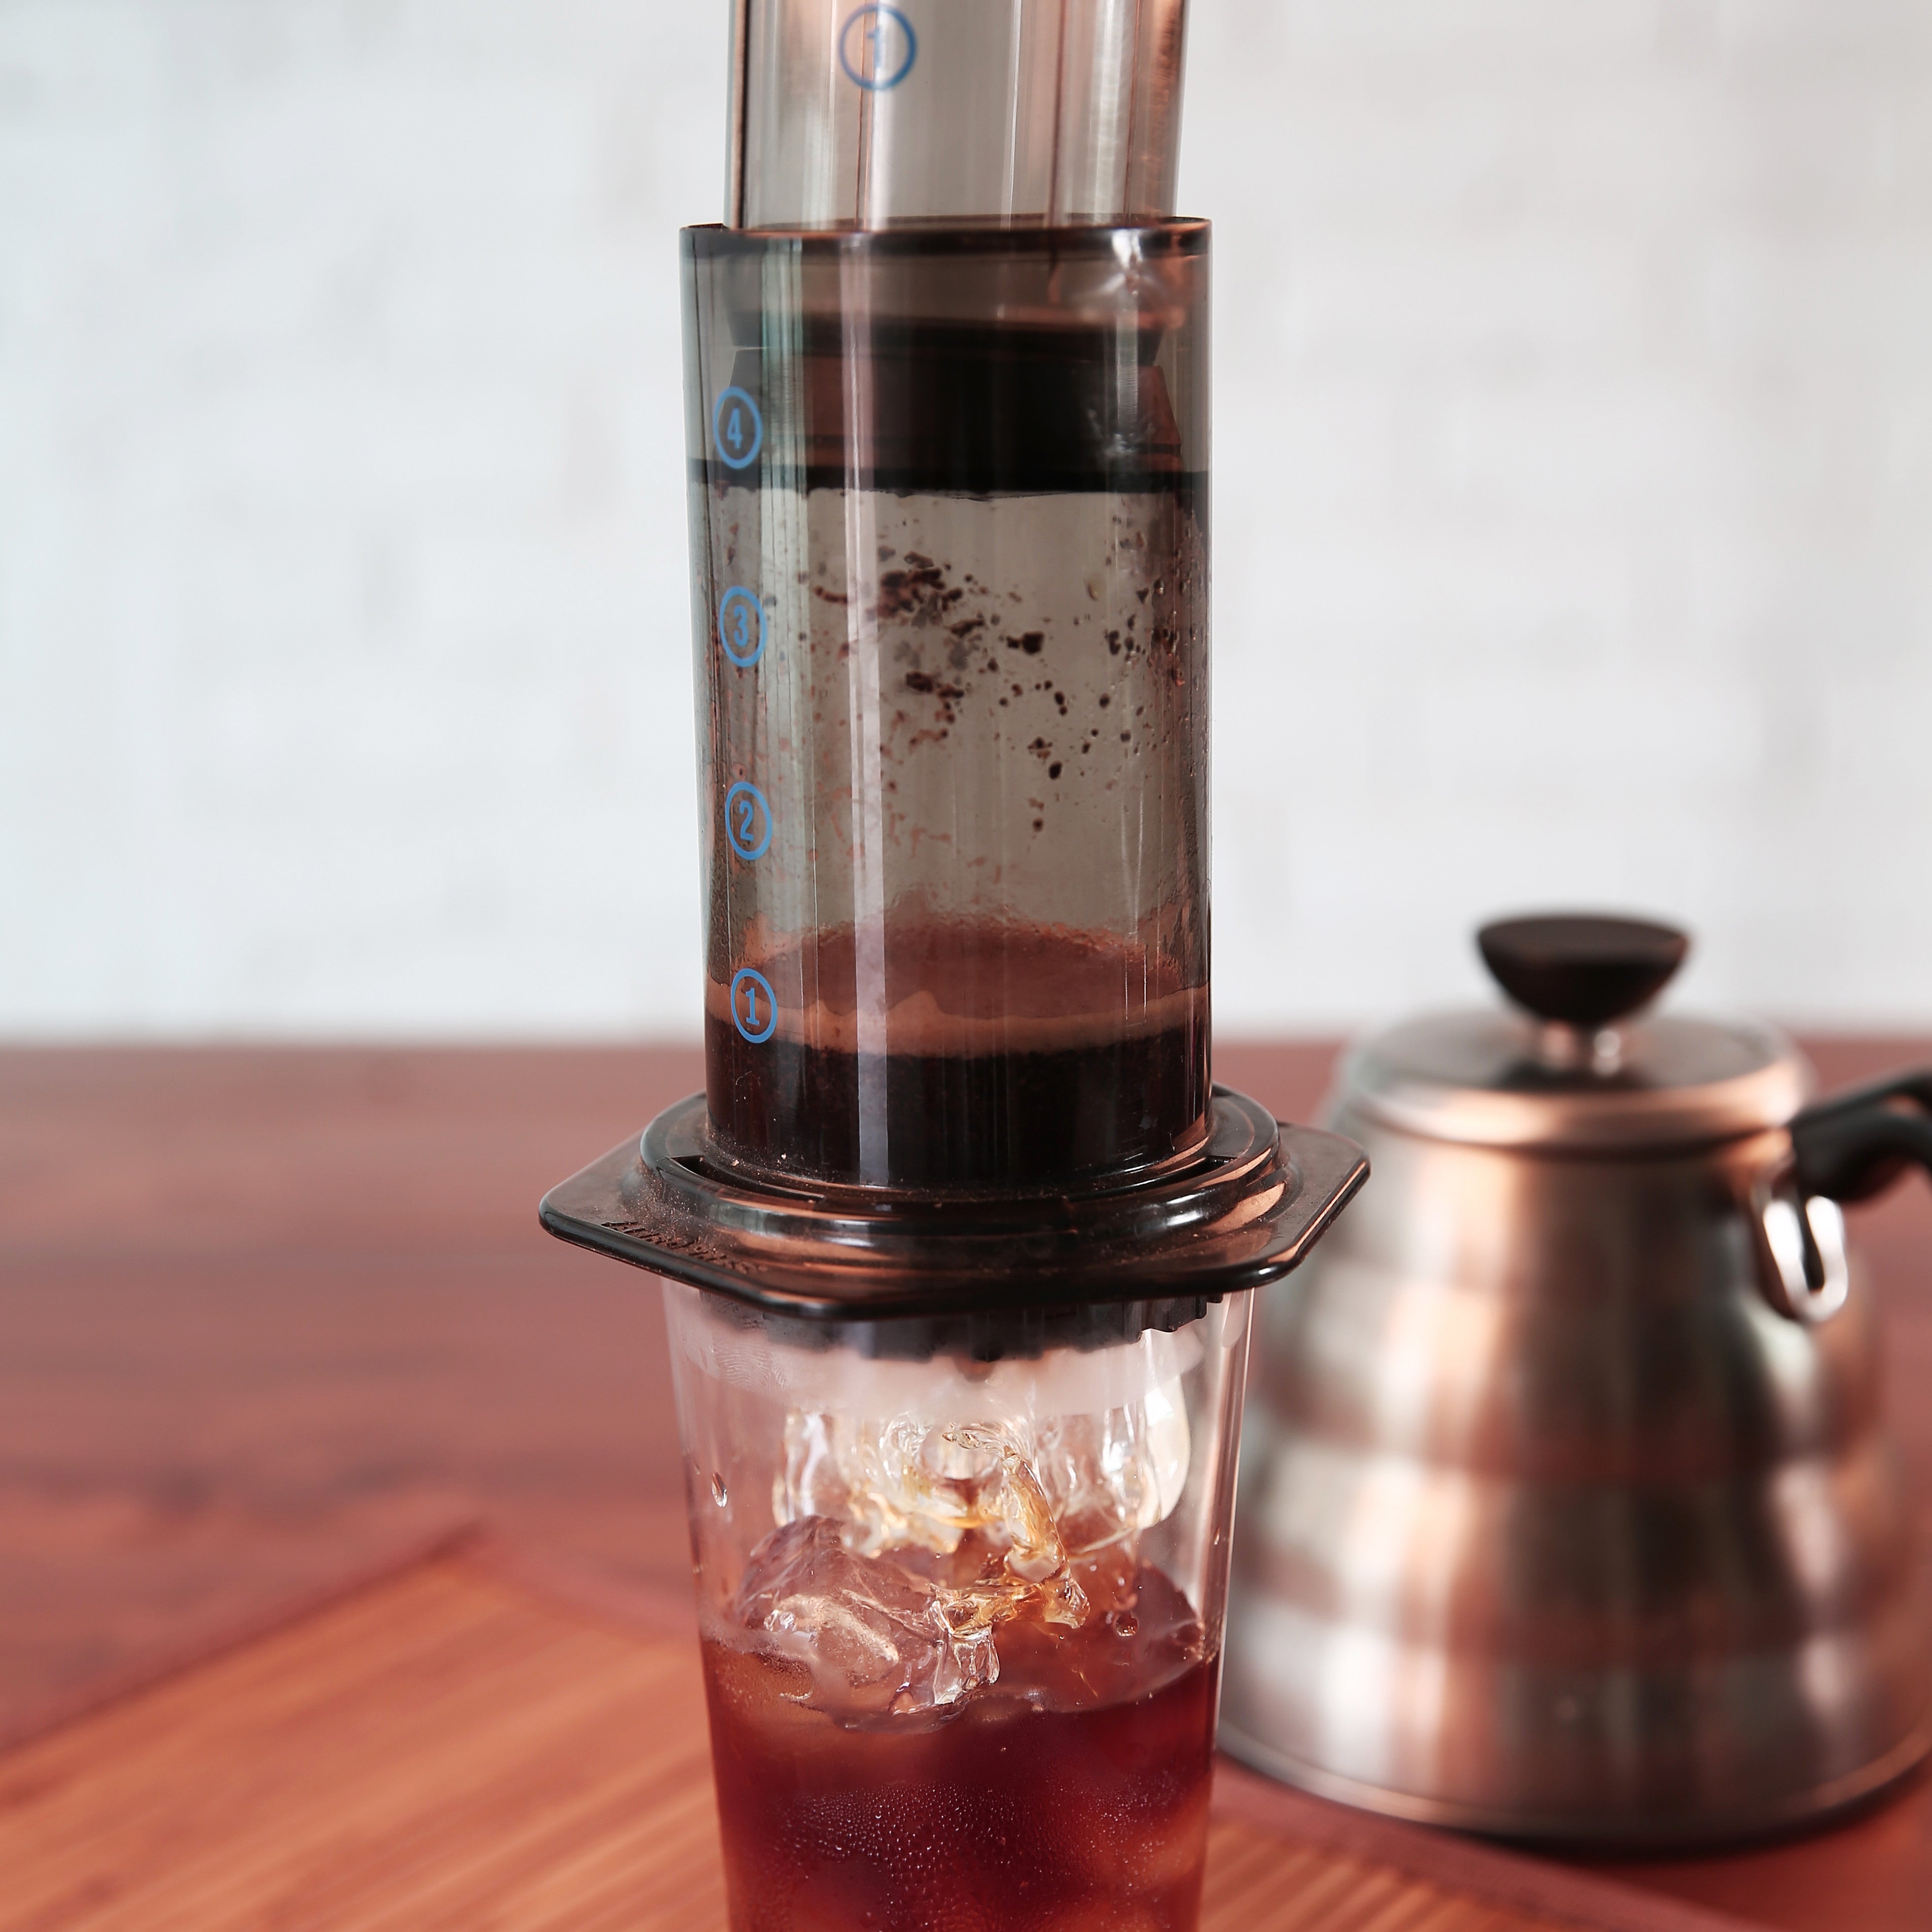 How to use Aeropress - Buy Freshly Roasted Coffee Beans Online